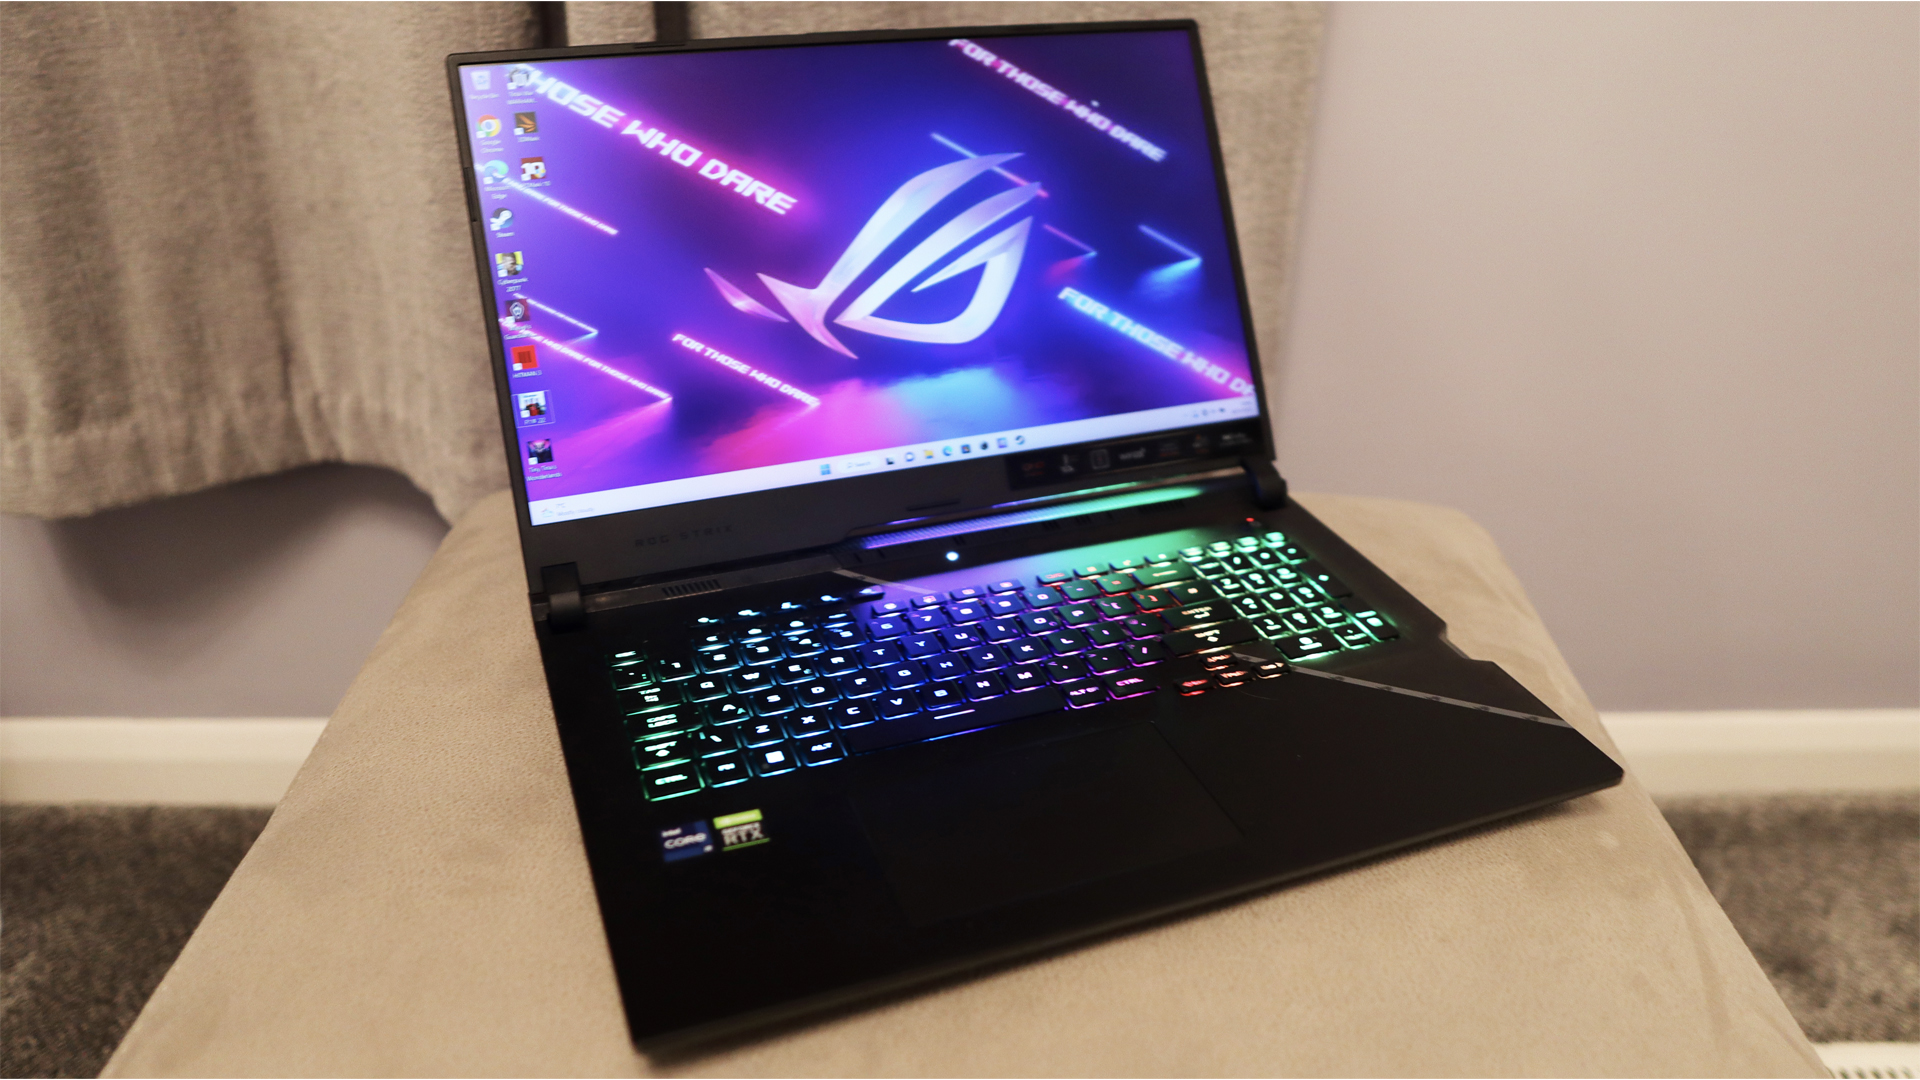 The best gaming laptop is the Asus ROG Strix Scar 17 (2022)